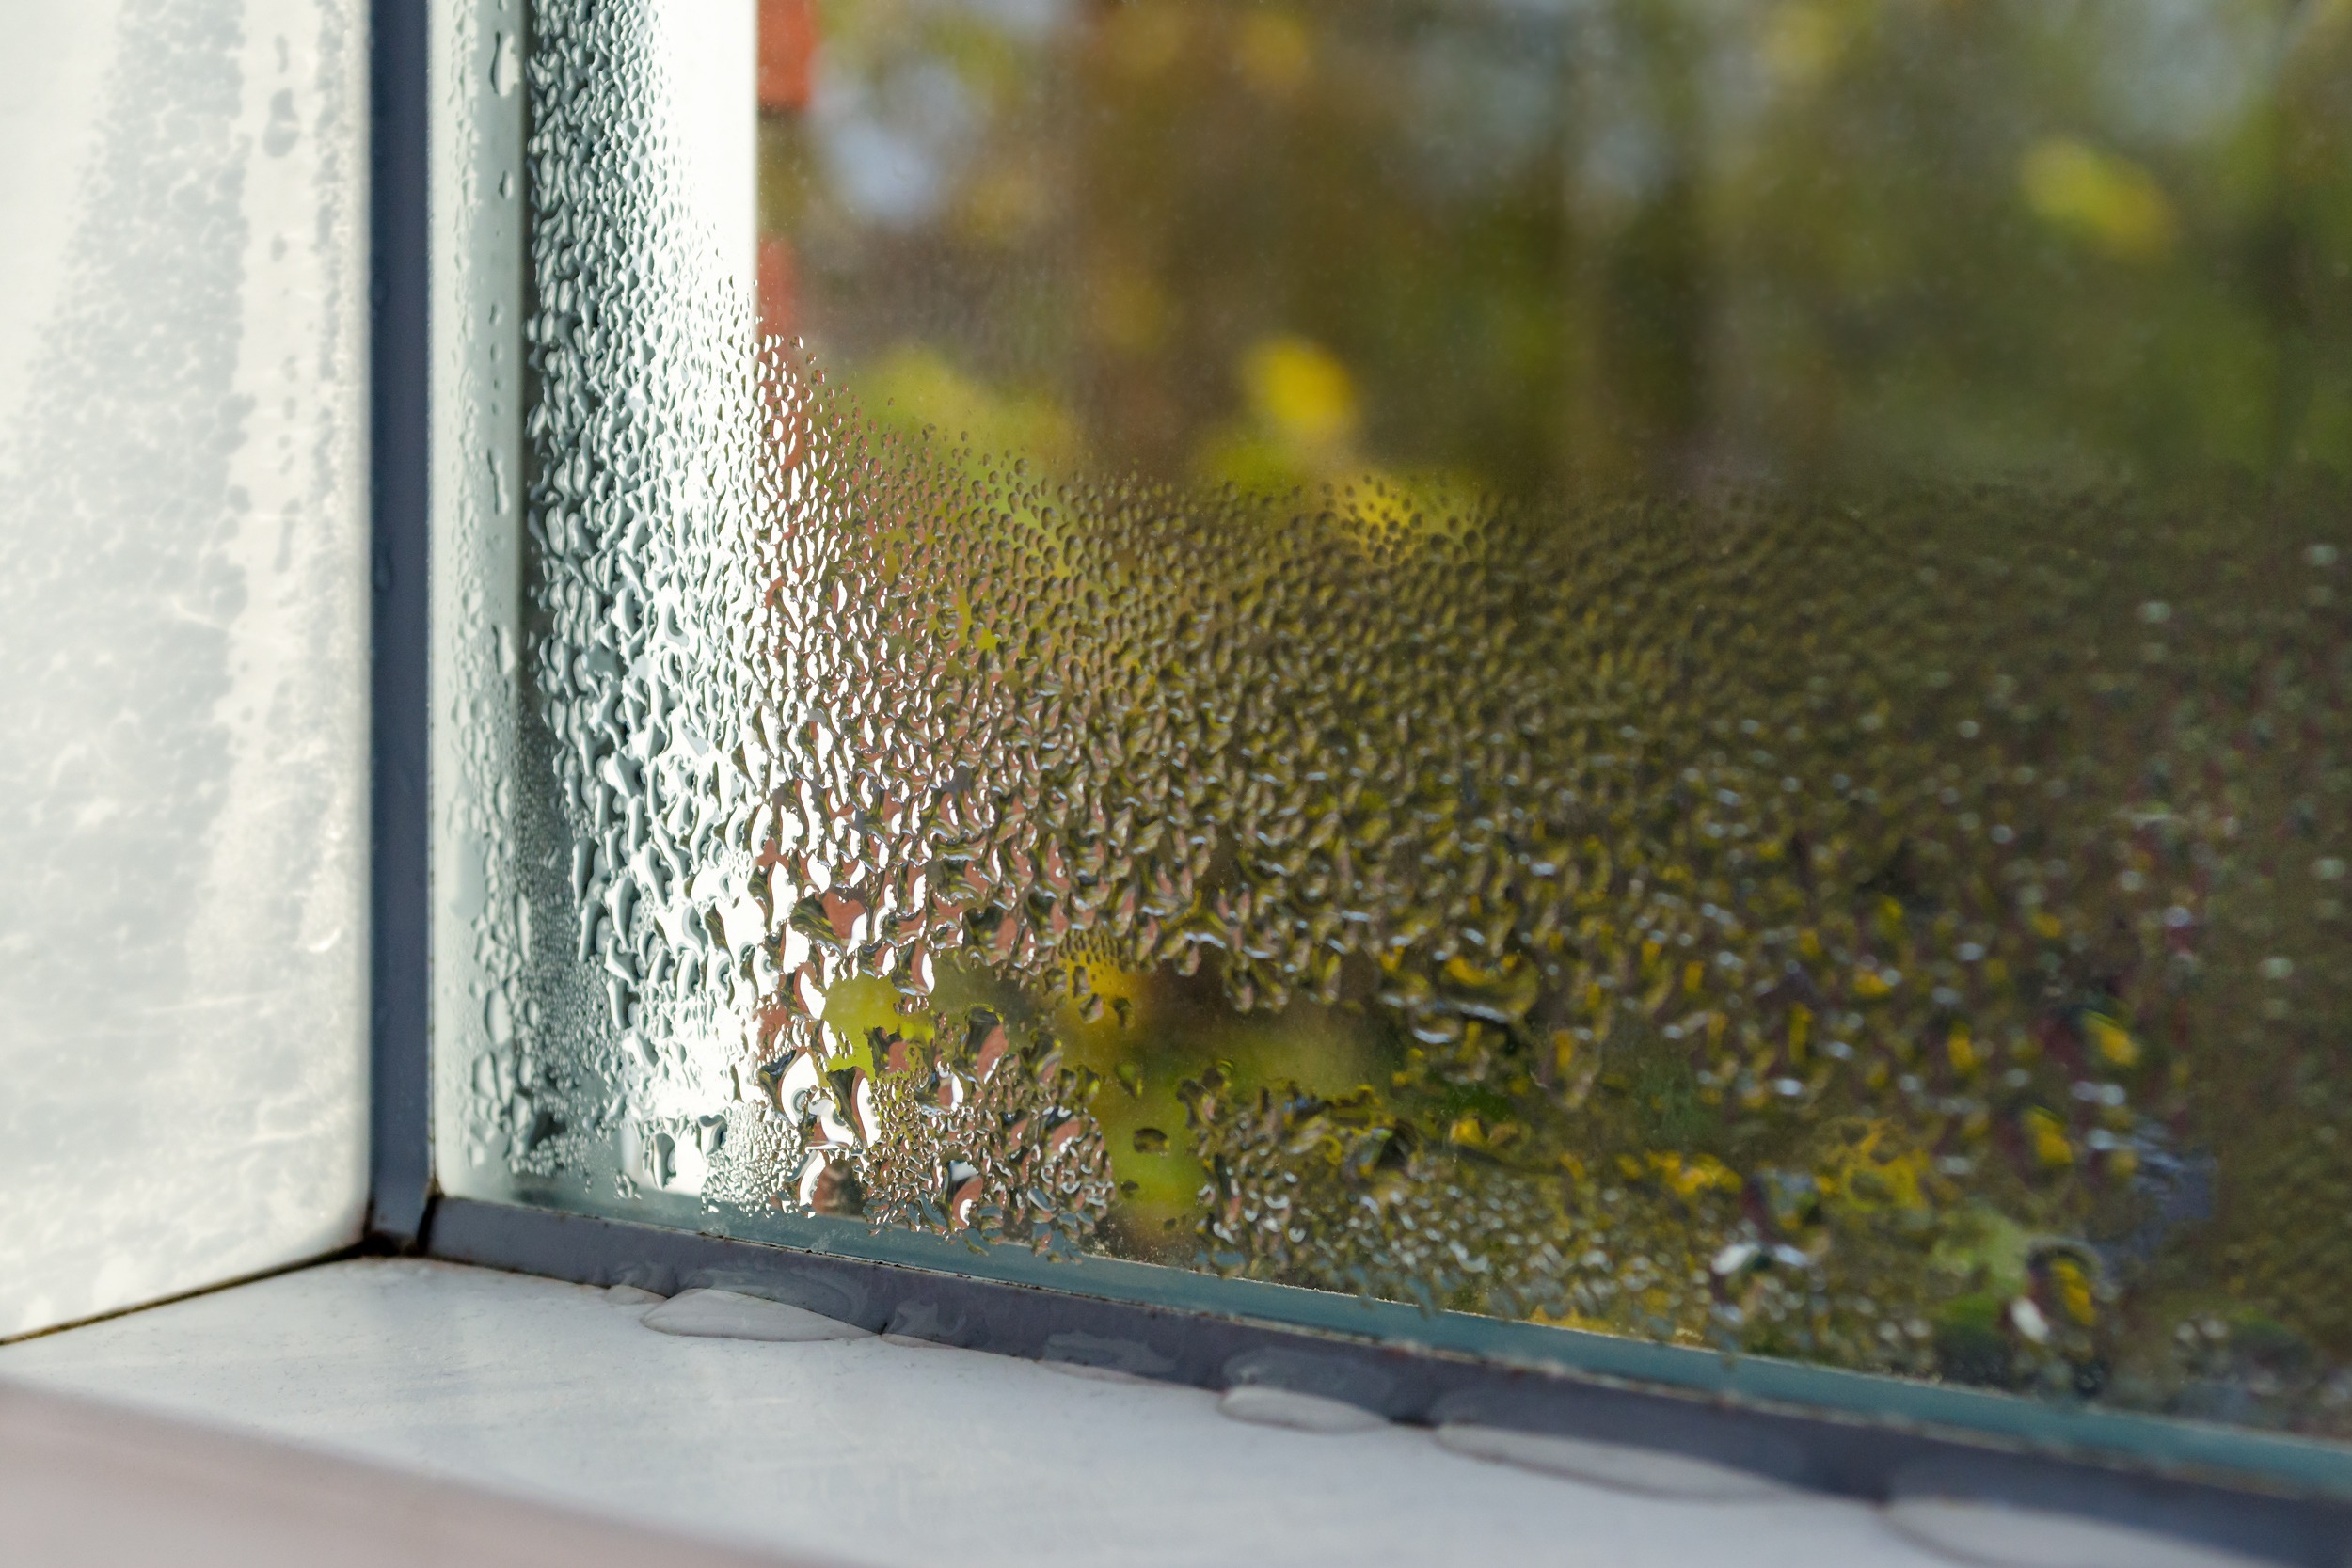 What is condensation?